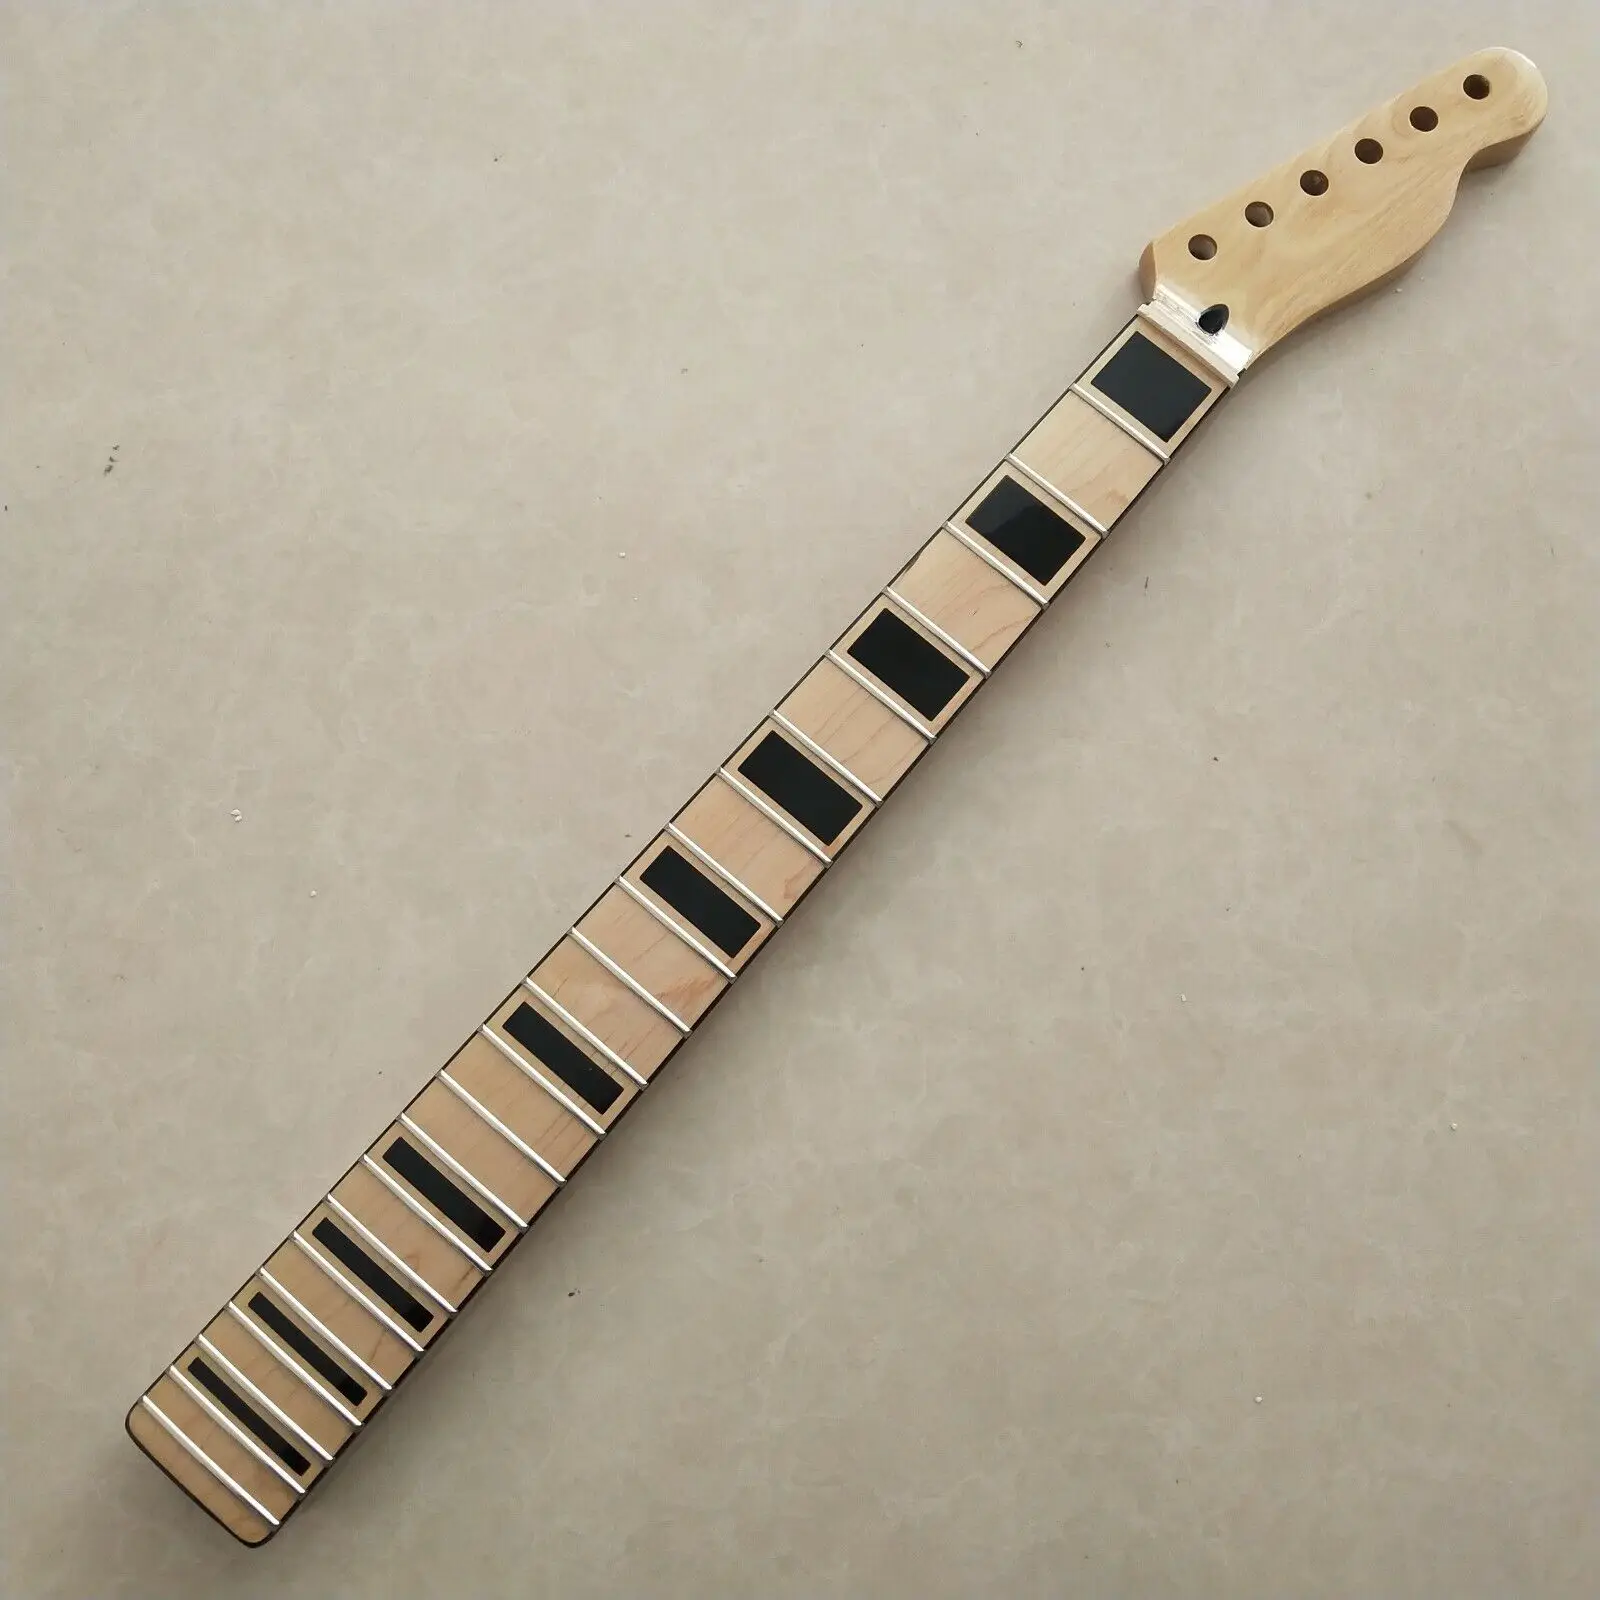 High quality Maple Guitar neck 22 fret 25.5in Maple Fretboard Black Block Inlay enlarge